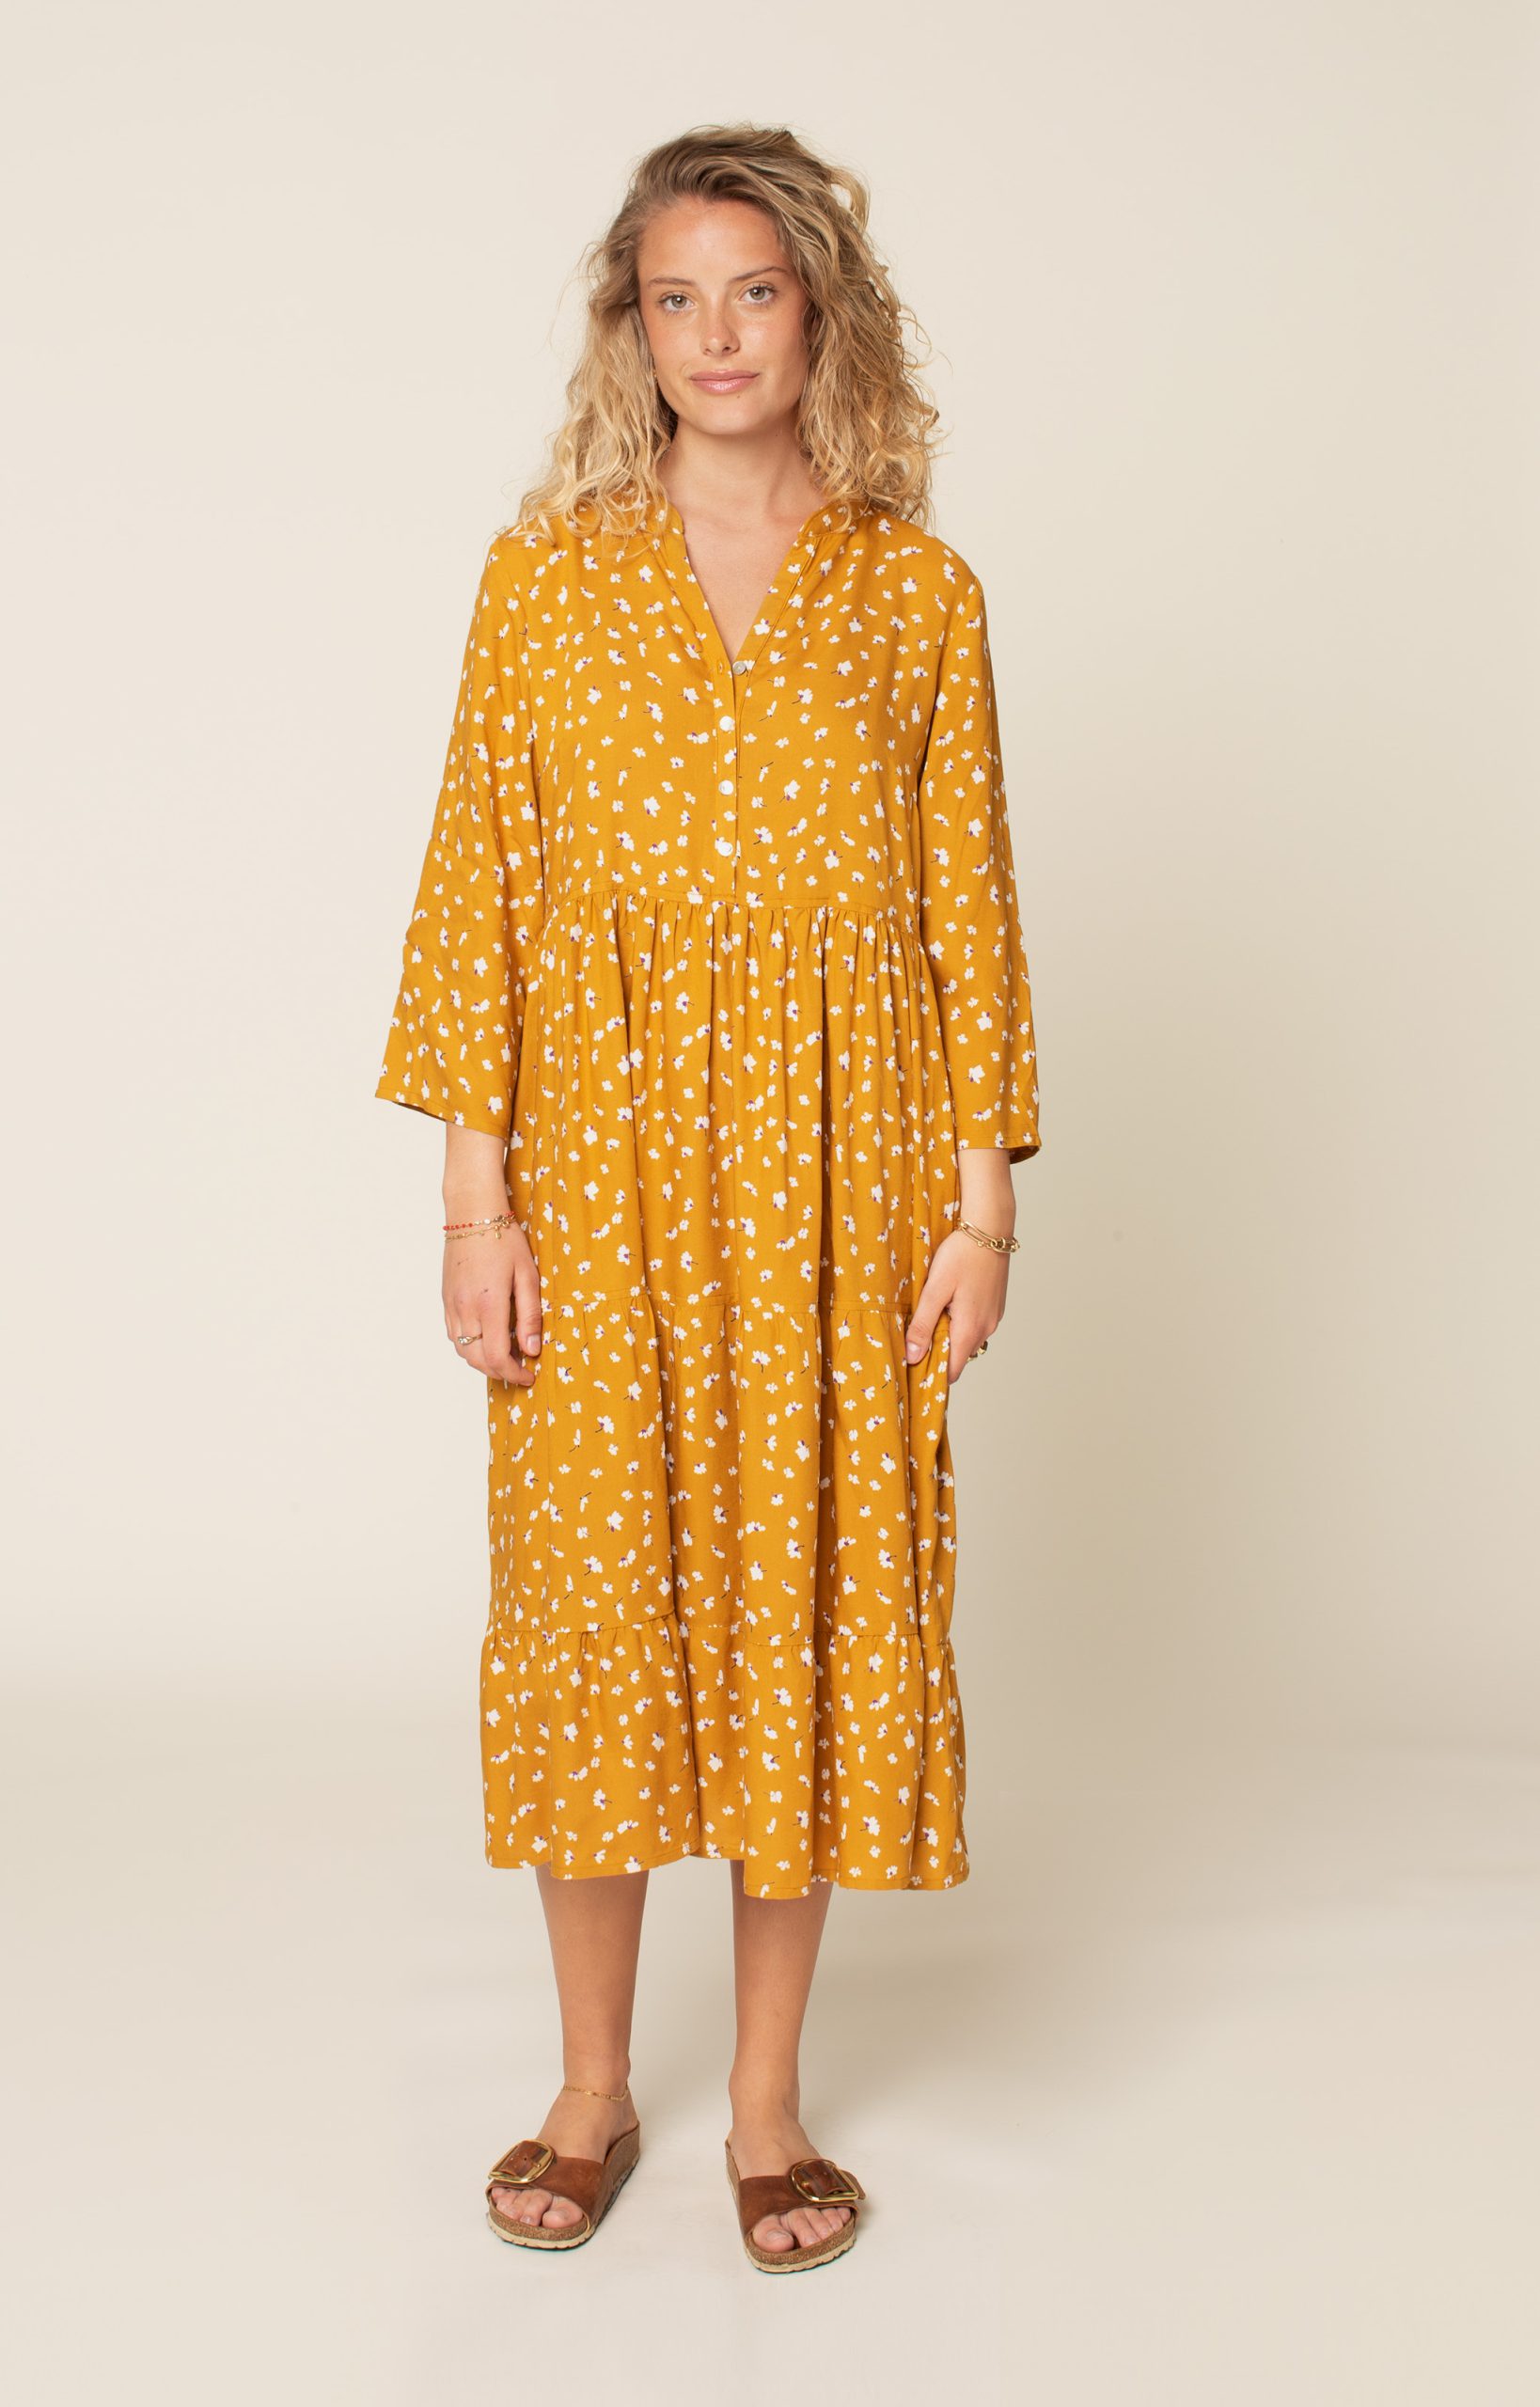 Woman wearing the Freedom Dress sewing pattern from Wardrobe by Me on The Fold Line. A dress pattern made in cotton, viscose, tencel or silk fabrics, featuring a loose, floaty style, in-seam pockets, gathered skirt with tiered hem, ¾ length loose fitting 